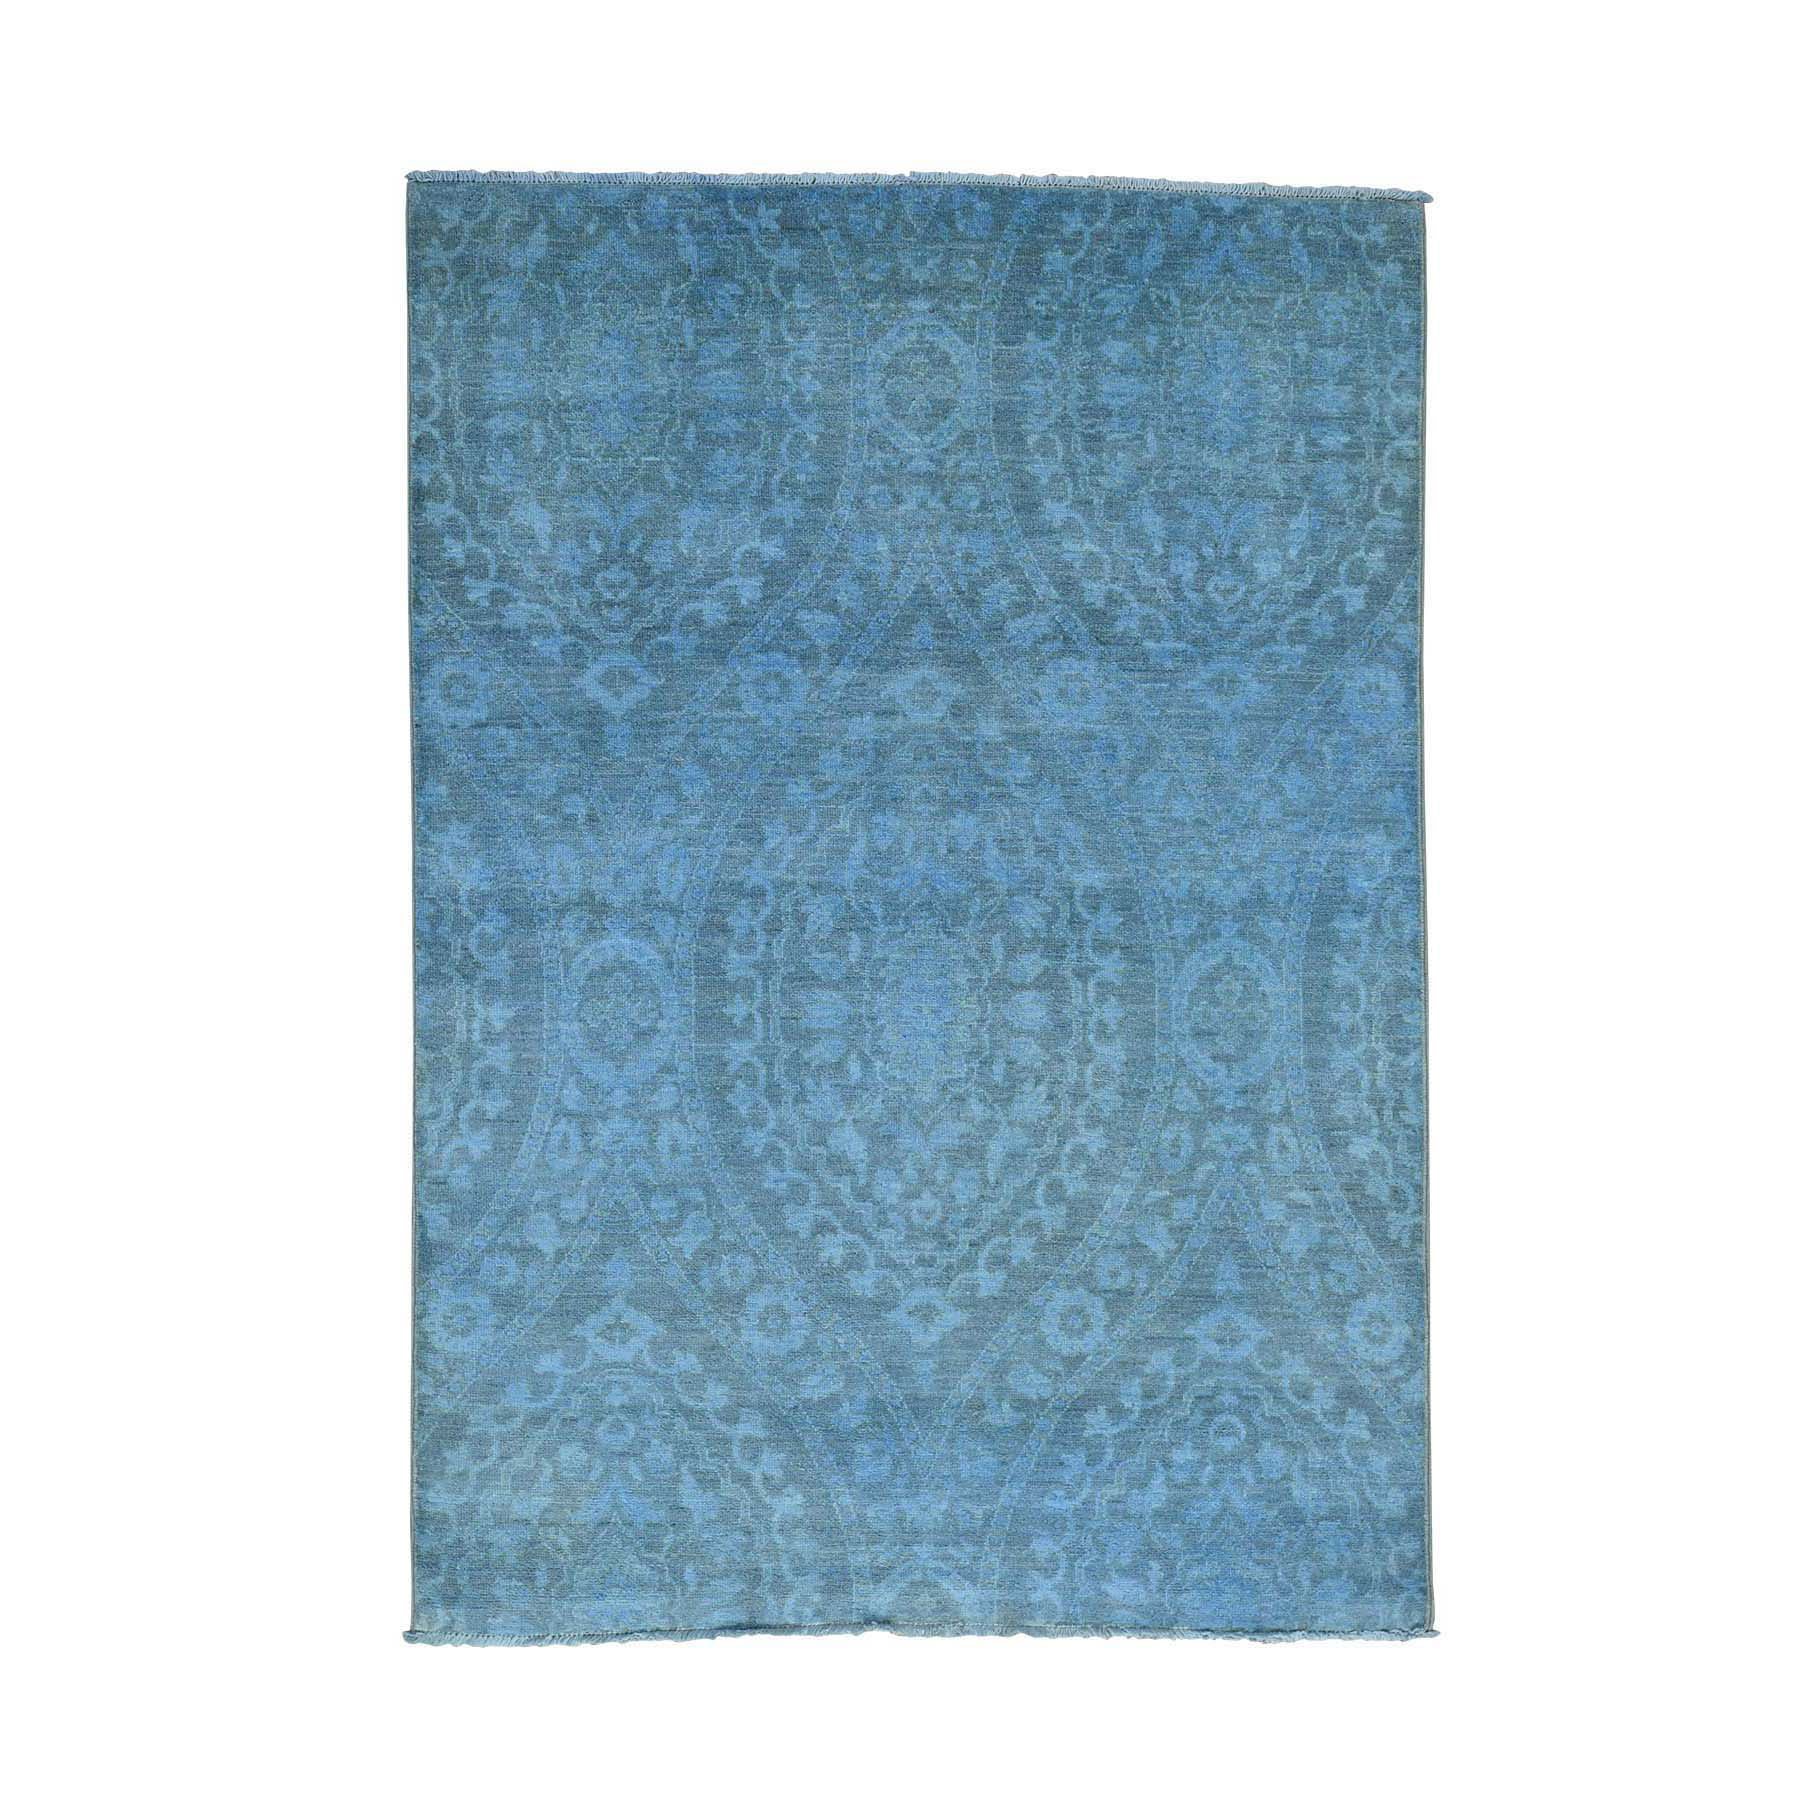 5'1"x7'2" Hand Woven Overdyed Ikat With Moughal Design Oriental Rug 